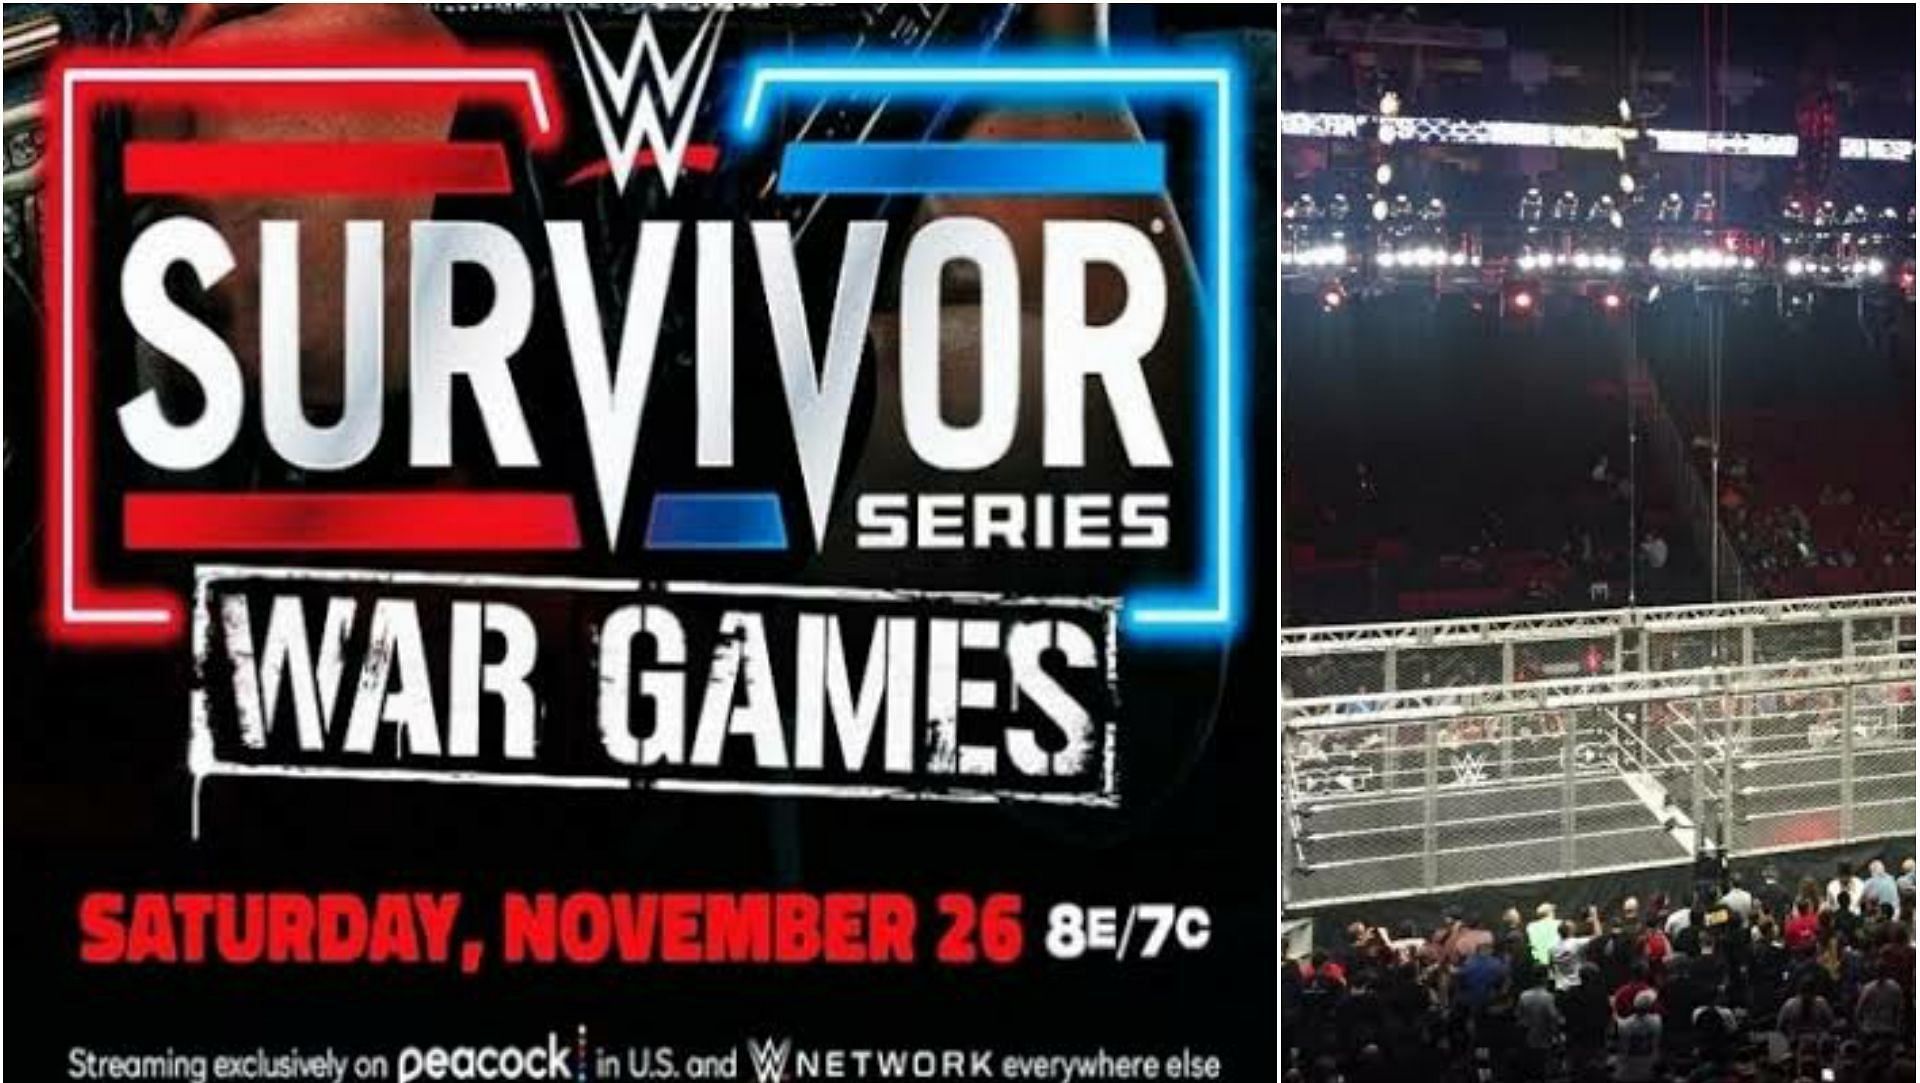 The event will witness two WarGames matches.  